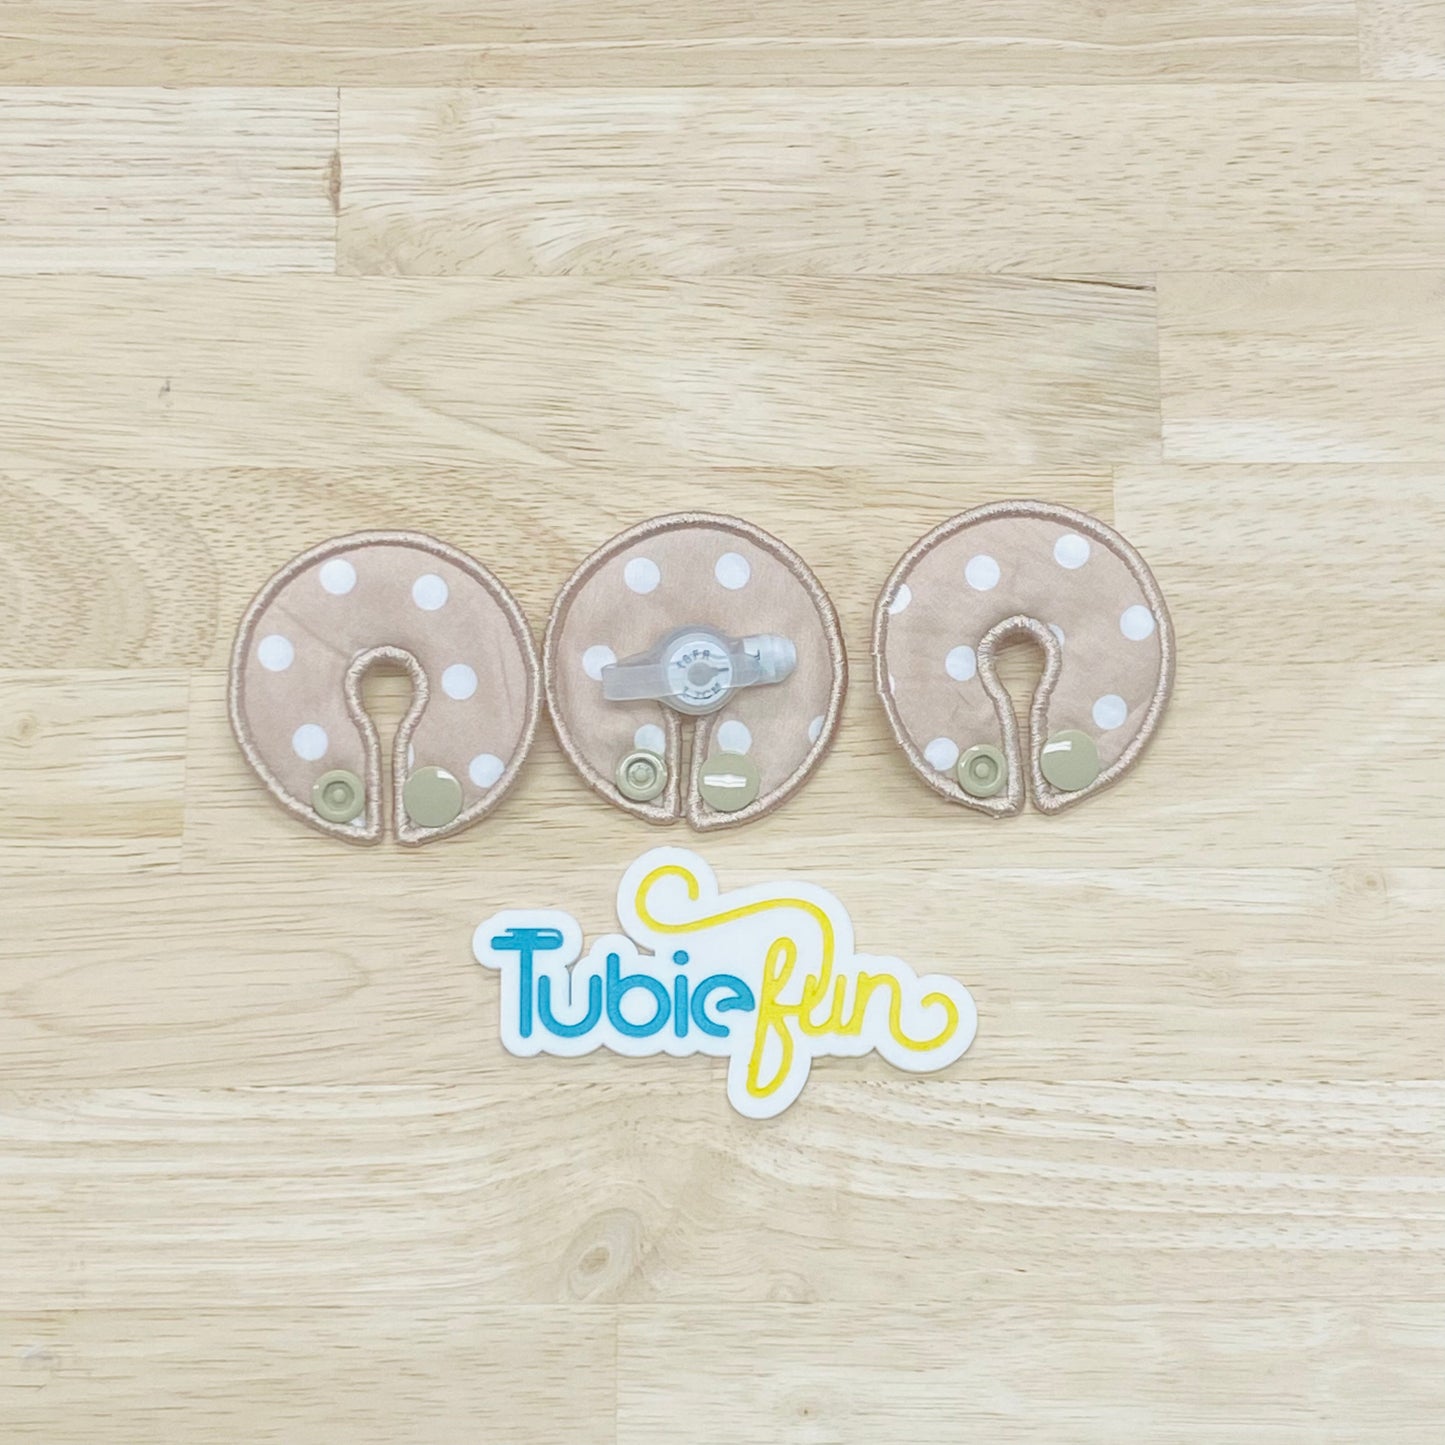 G-Tube Button Pad Cover - White Spots on Tan